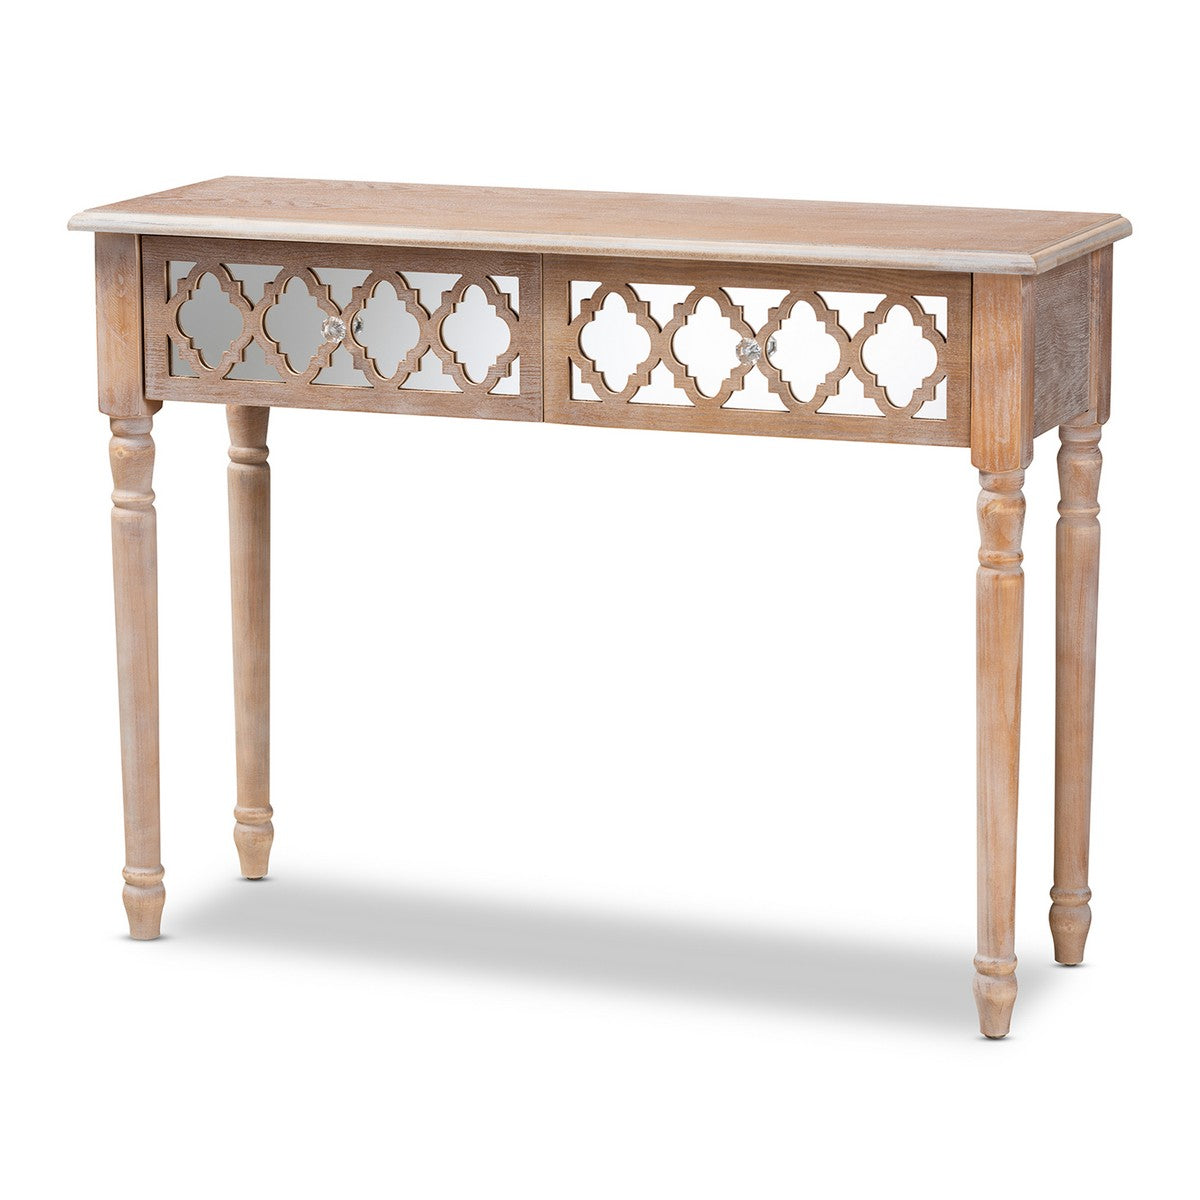 Baxton Studio Celia Transitional Rustic French Country White-Washed Wood and Mirror 2-Drawer Quatrefoil Console Table Baxton Studio-side tables-Minimal And Modern - 1